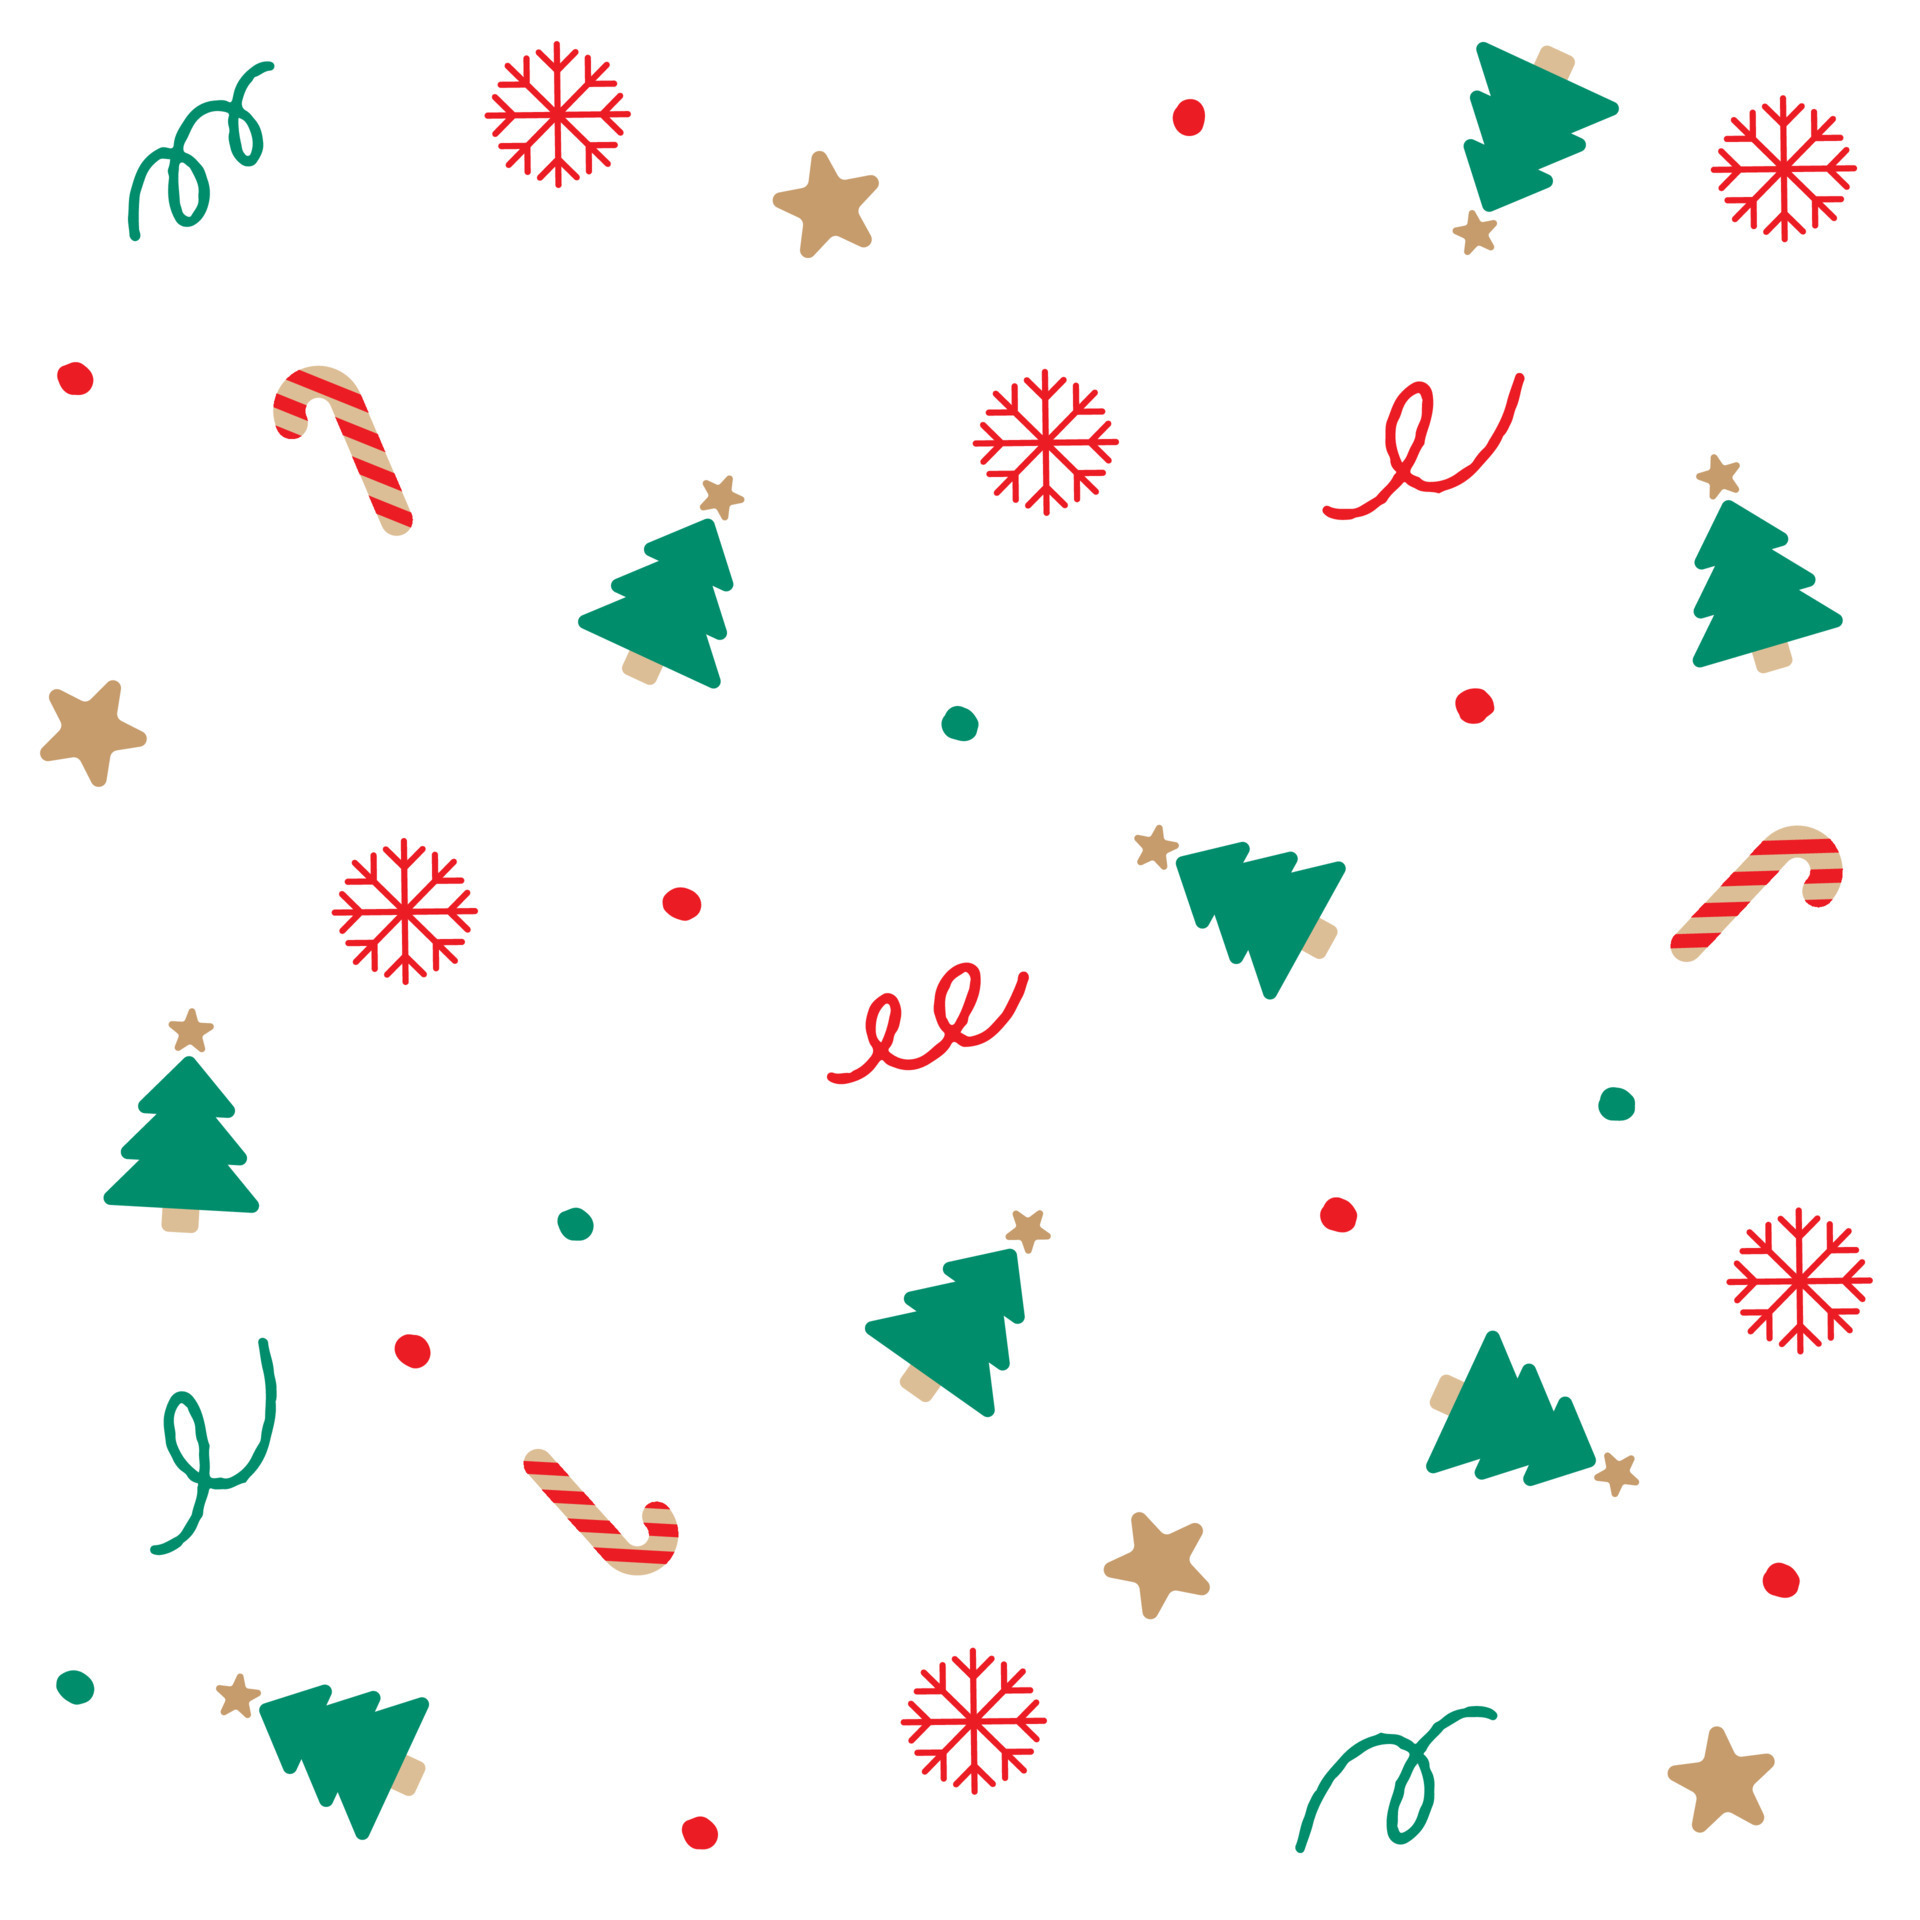 Seamless pattern with small snowflakes or stars Vector Image